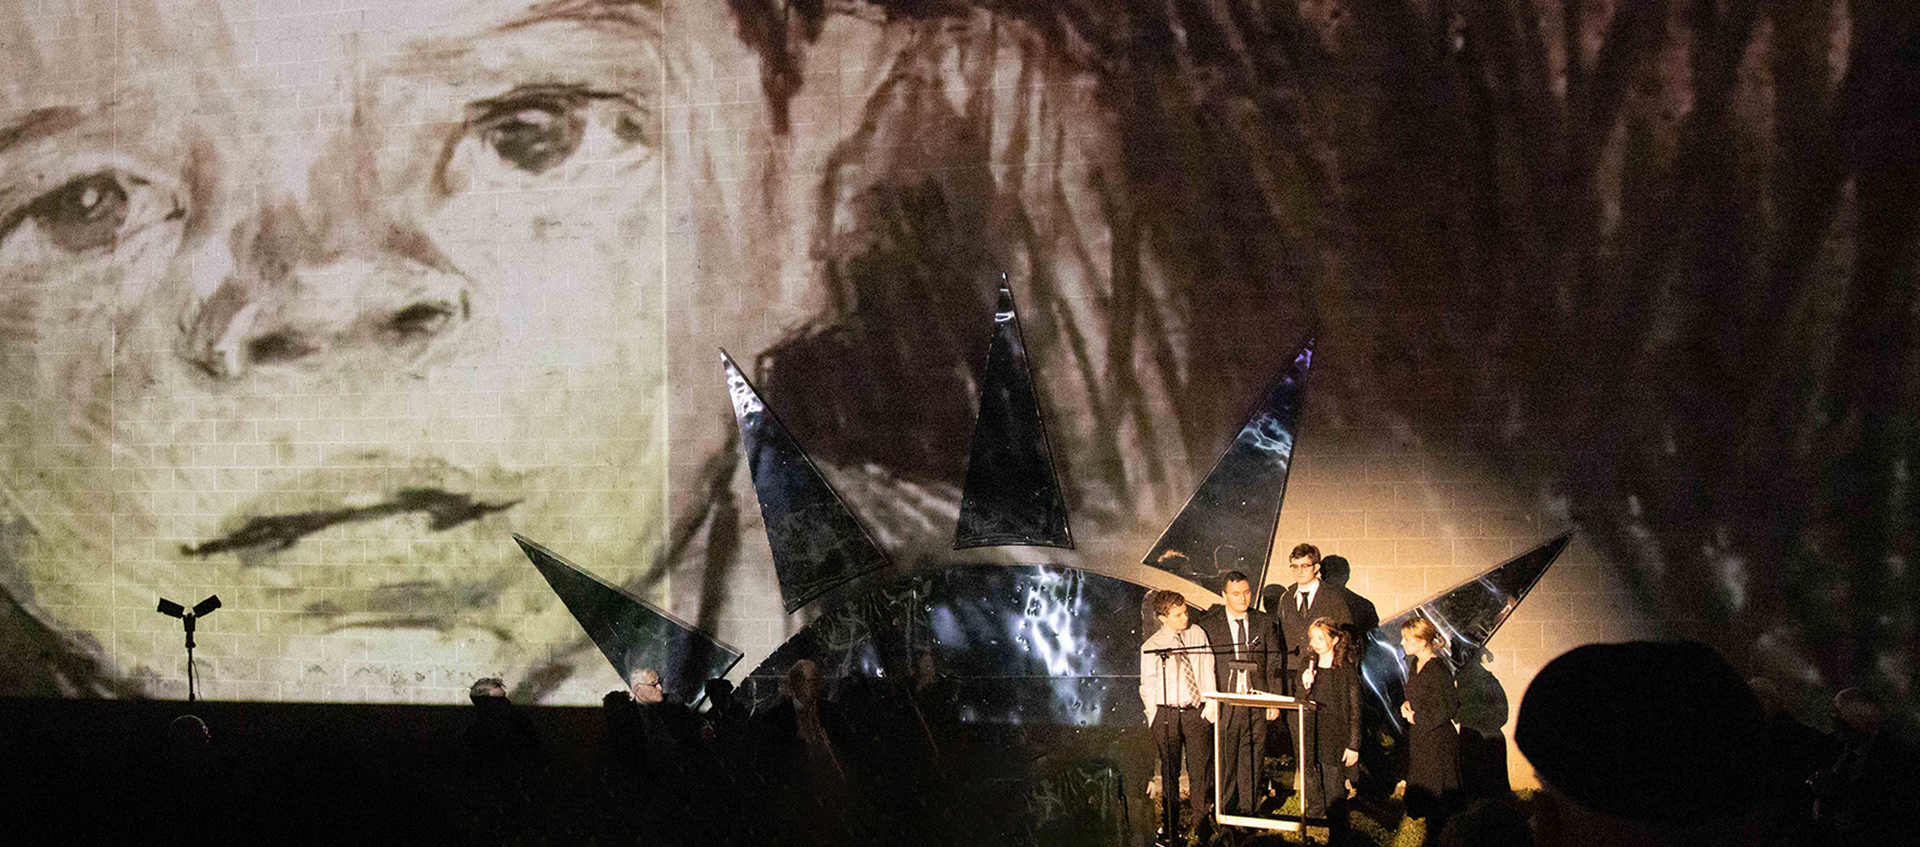 An image from the original production of Calling Hours, a large drawing of a child’s face is projected behind a group wearing suits and black dresses. 